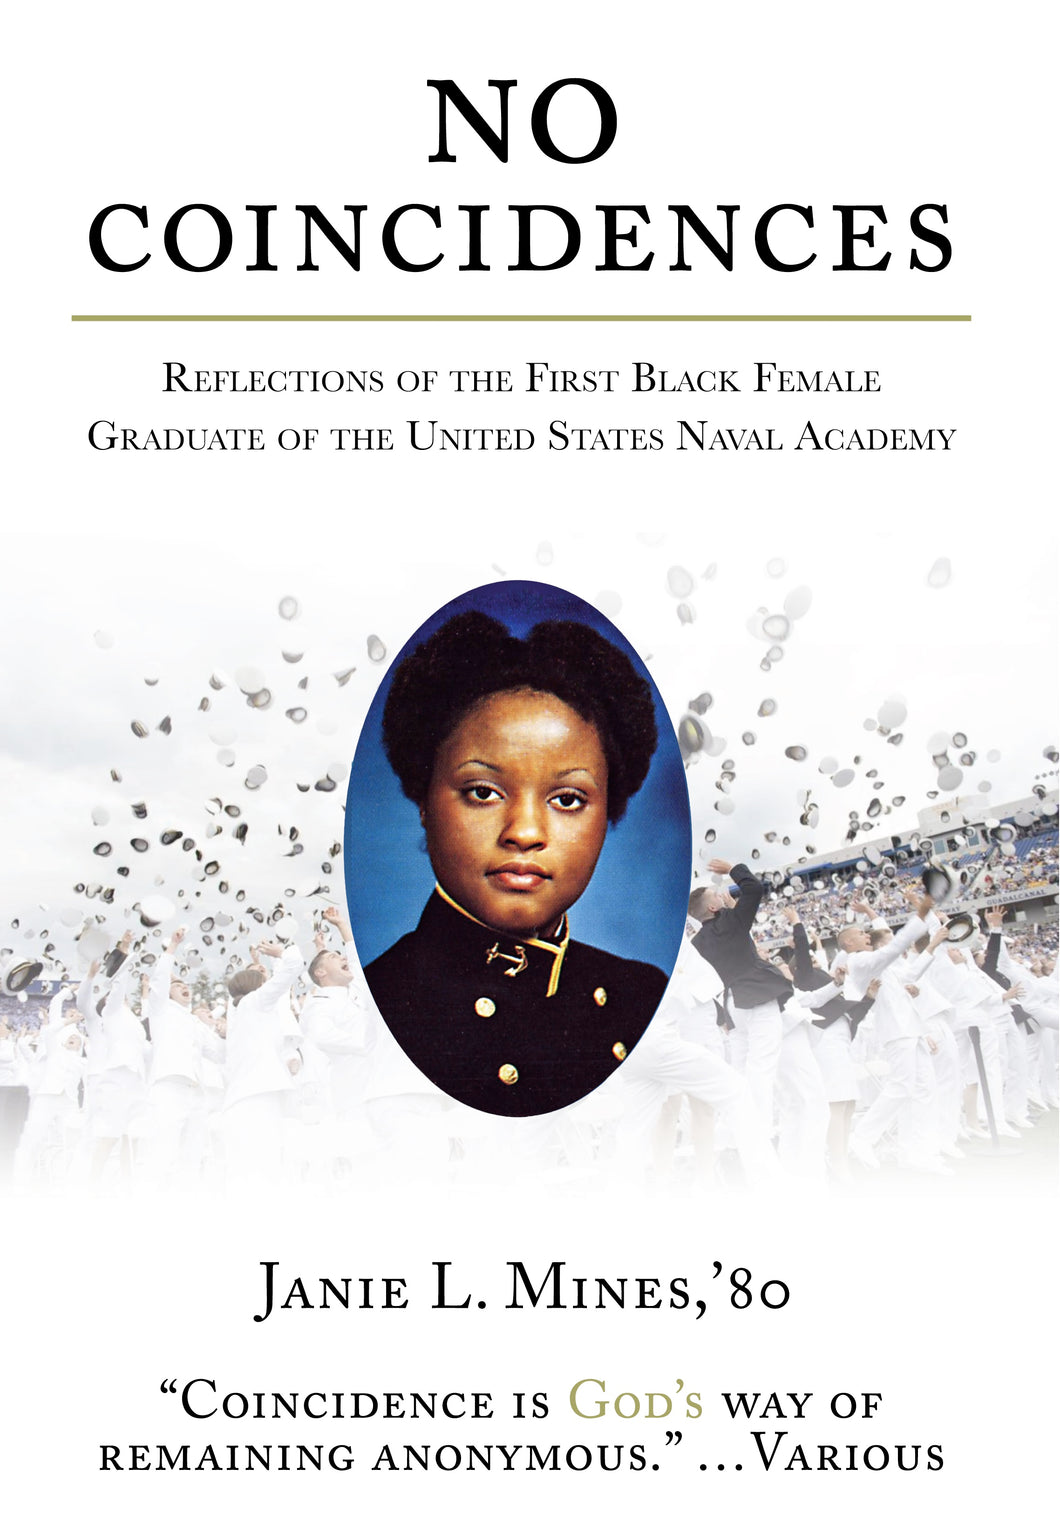 CDs - No Coincidences - Reflections of the First Black Female Graduate of the United States Naval Academy